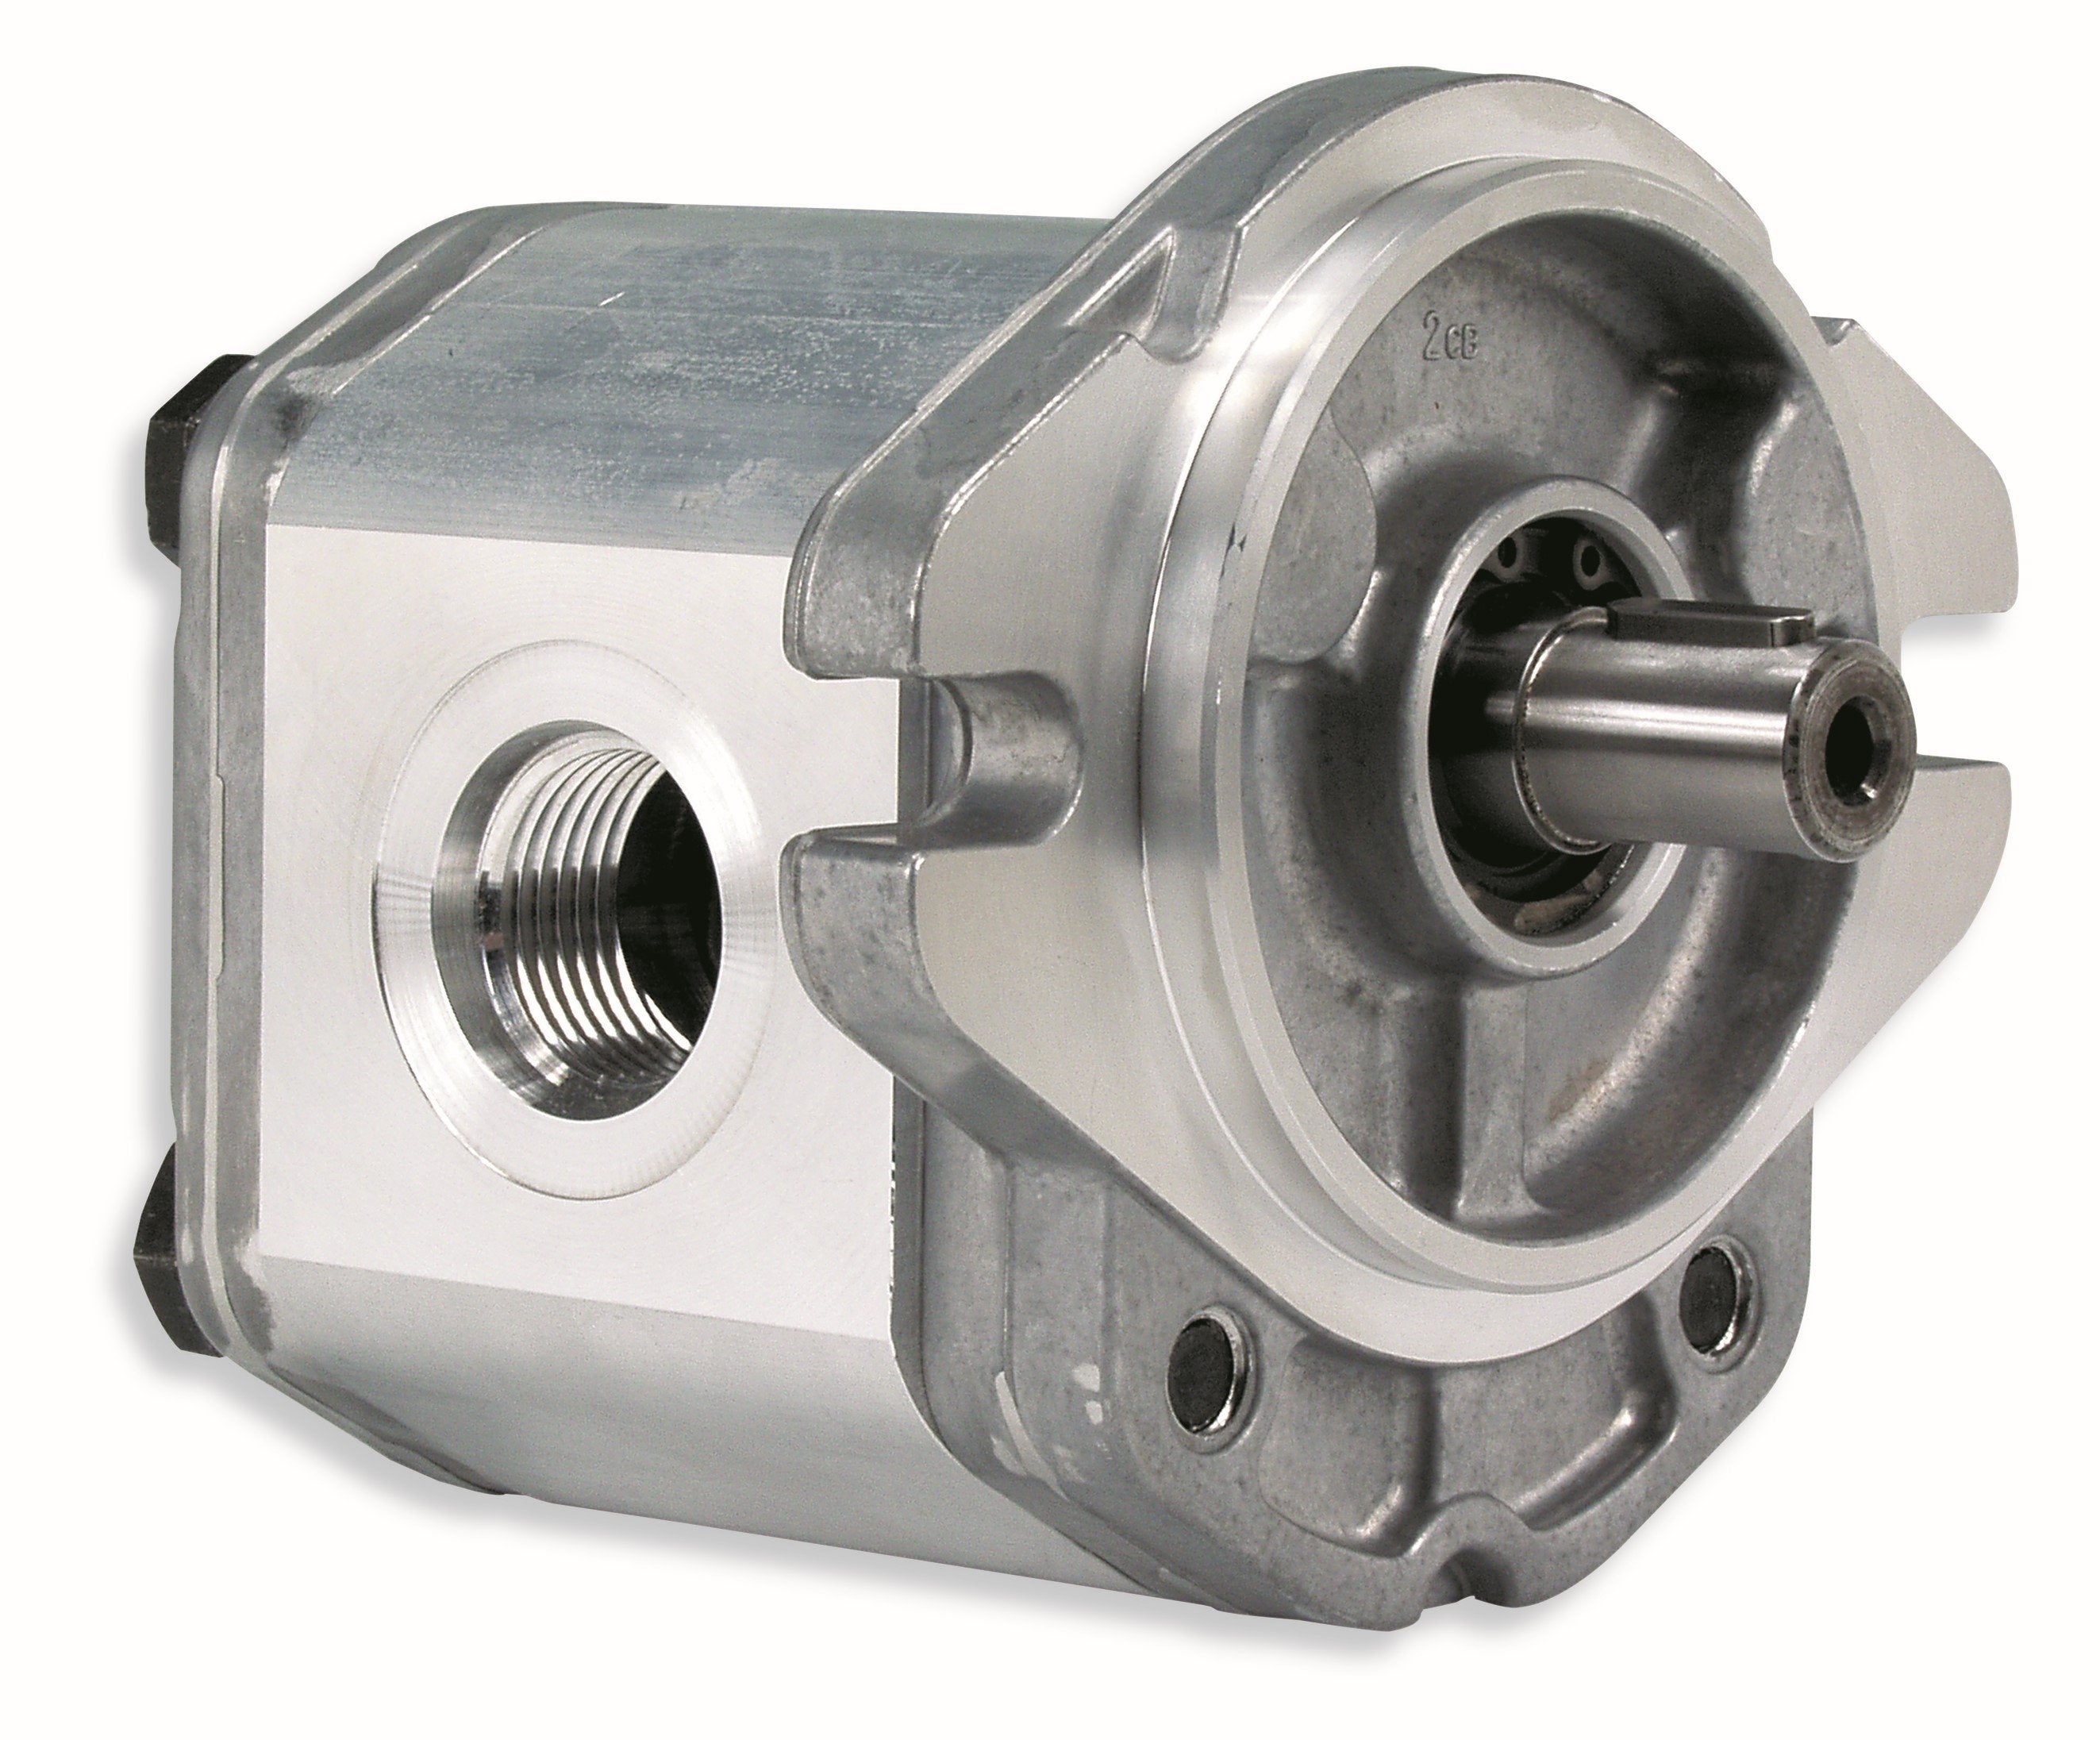 GHM3A-R-50-S1-E4 : Marzocchi Gear Motor, Bidirectional, 33cc, 3915psi rated, 3300RPM, 1" Code 61 ports, 13T 16/32DP Splined Shaft